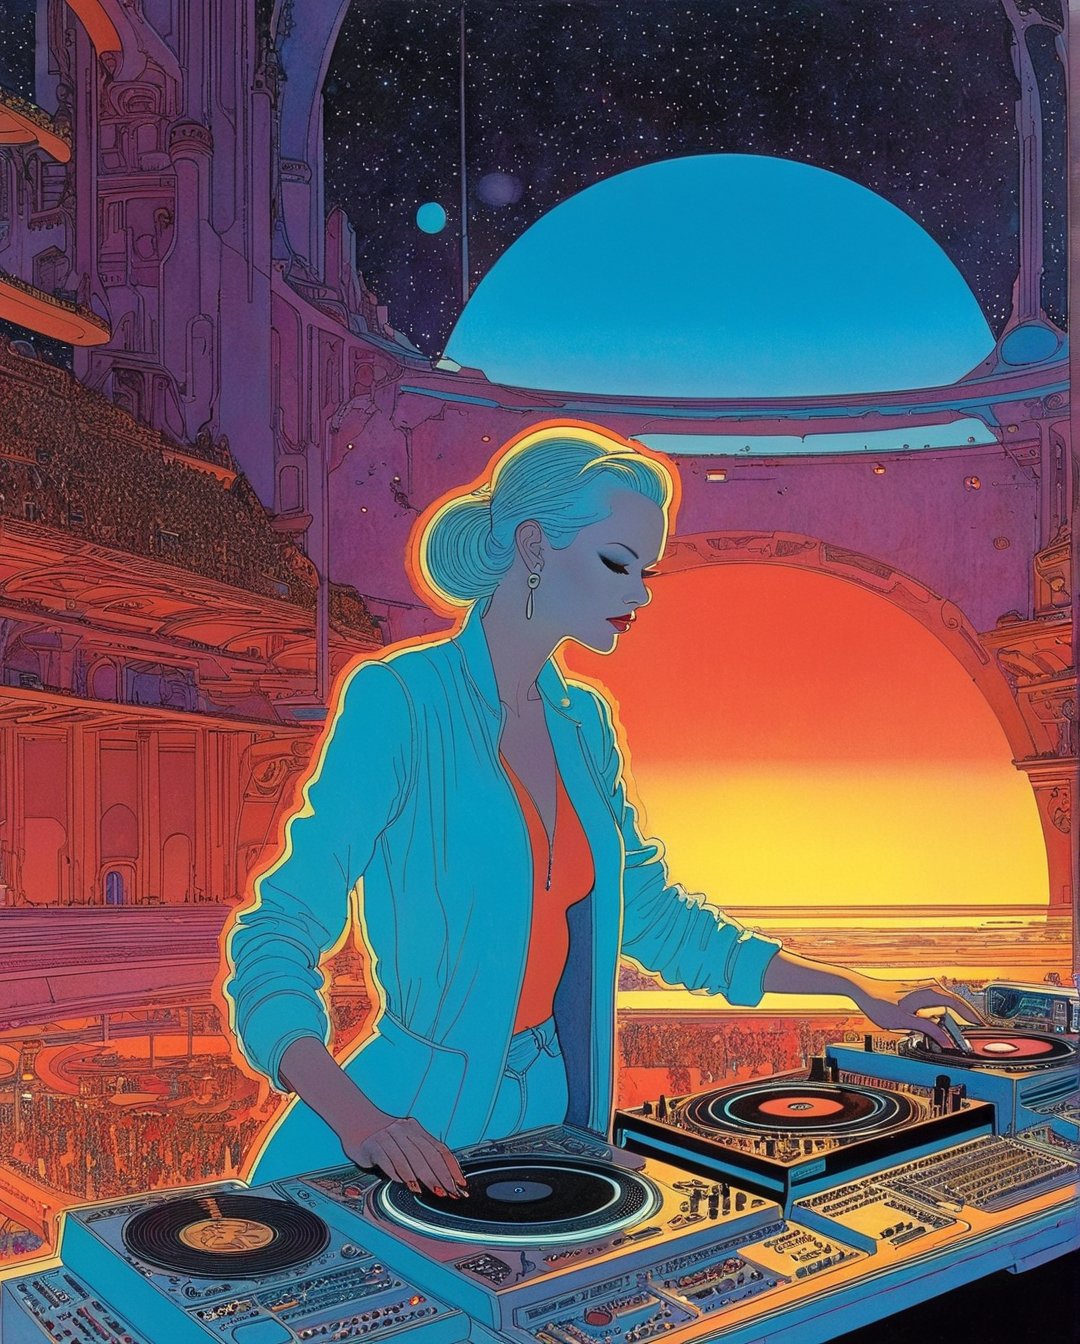 Moebius (Jean Giraud) Style - A picture by Jean Giraud Moebius, ((masterpiece)), ((best quality)), (masterpiece, highest quality), Create a female DJ working behind her console in a club, club background, l. art style by Moebius